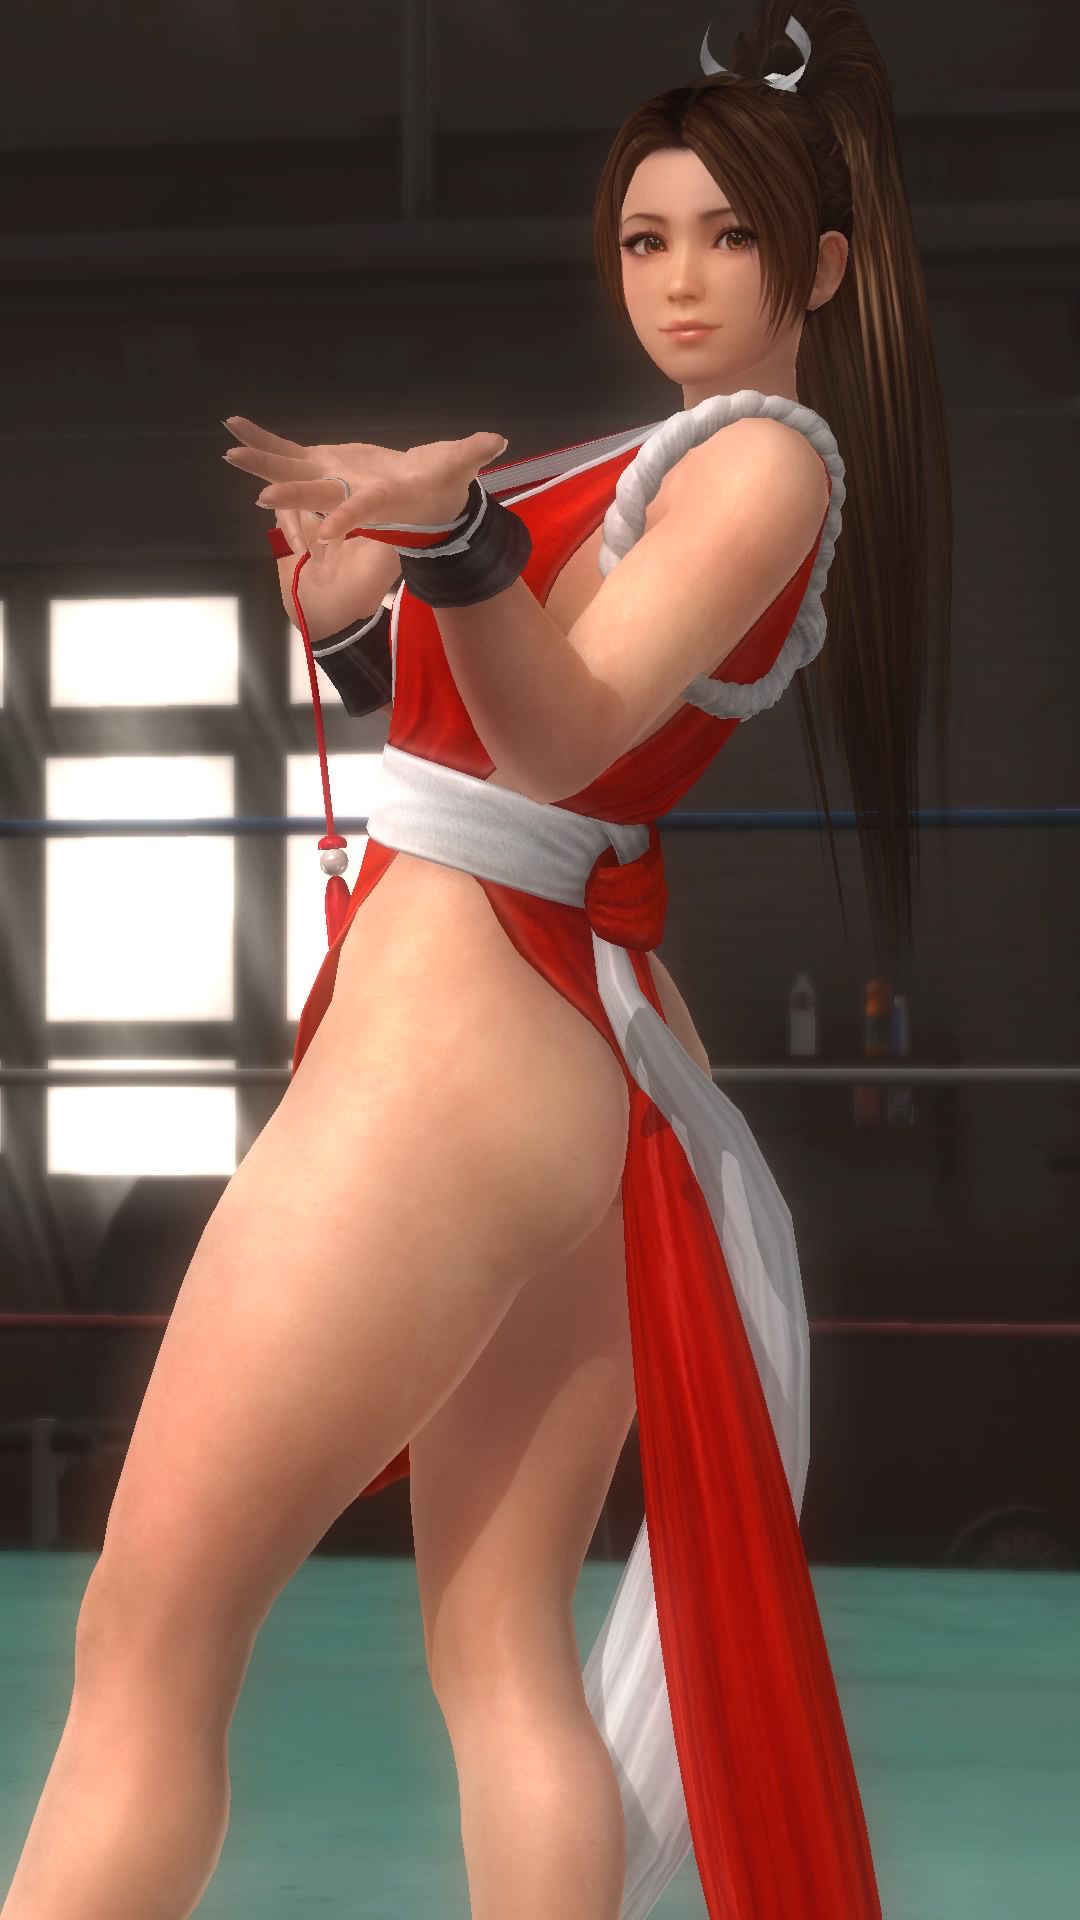 DOA5LR cheongsam delivery special! Elo slit not costume featured 32